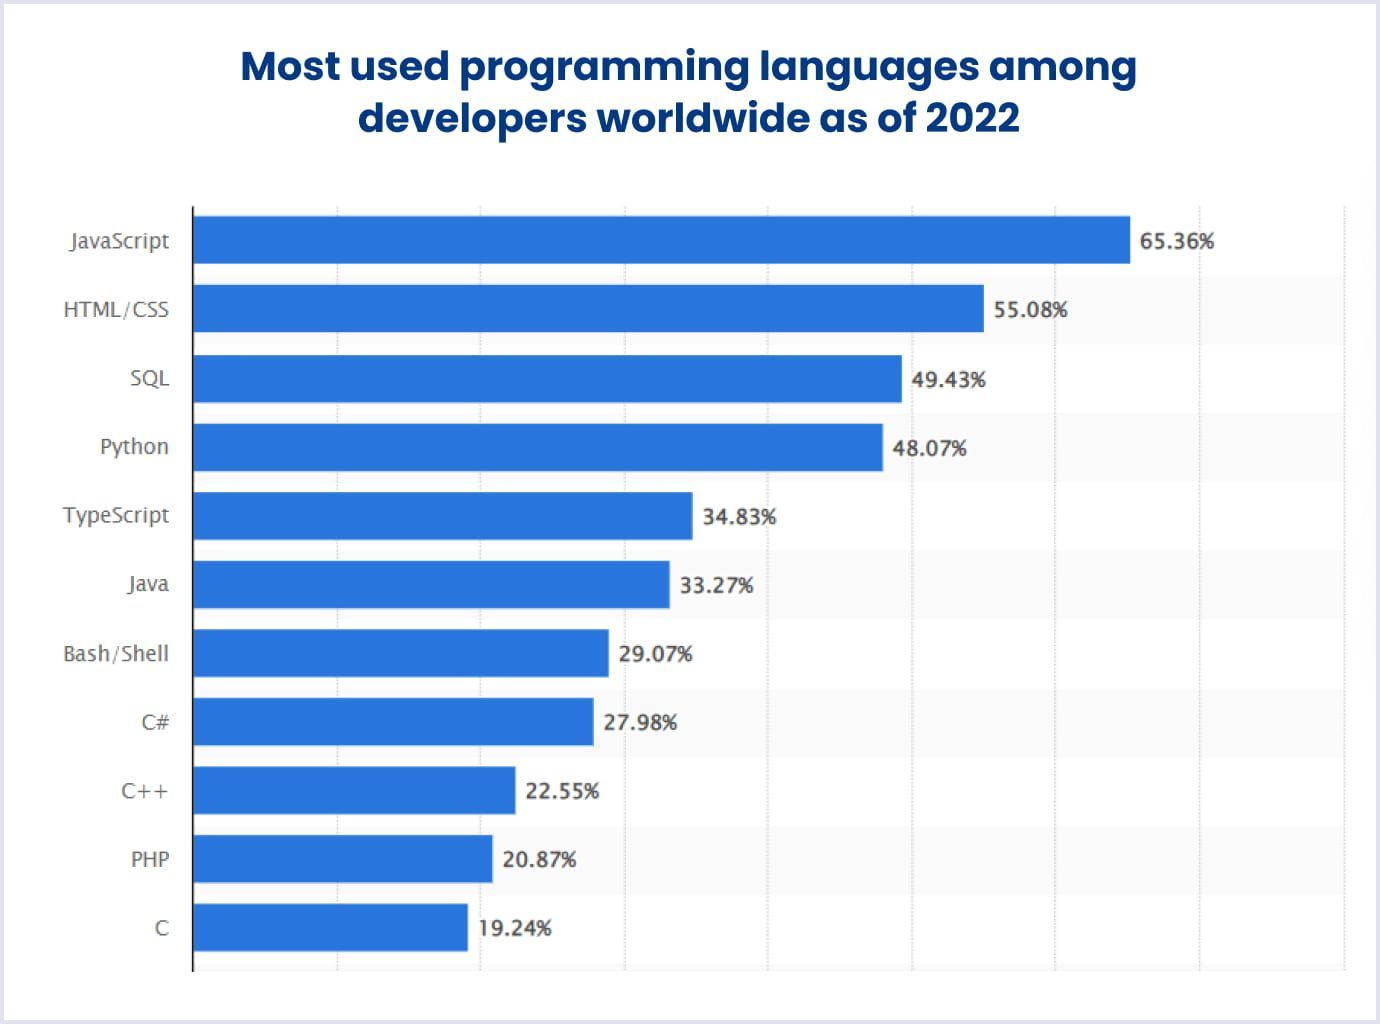 The most popular programming languages